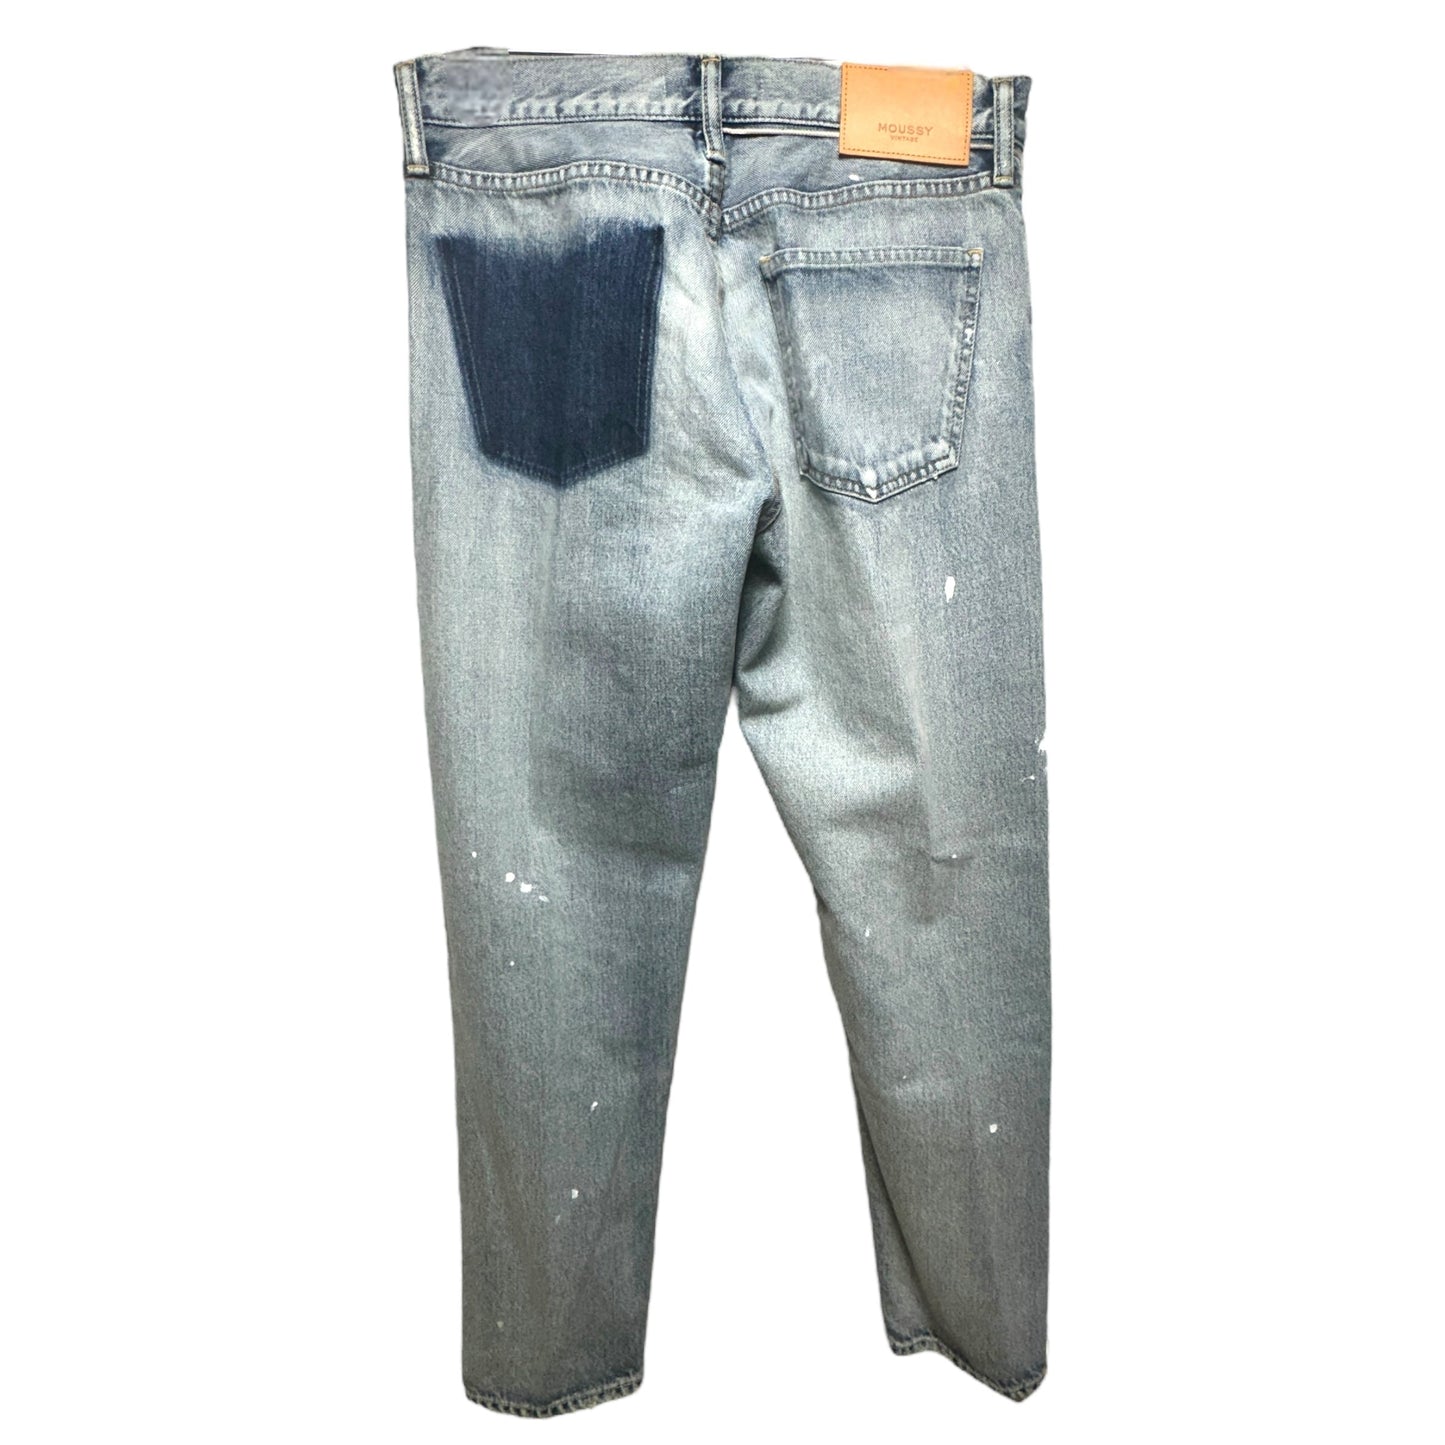 Maverick Tapered Button Fly Light Wash Distressed Jeans Designer By Moussy Vintage Size: 4